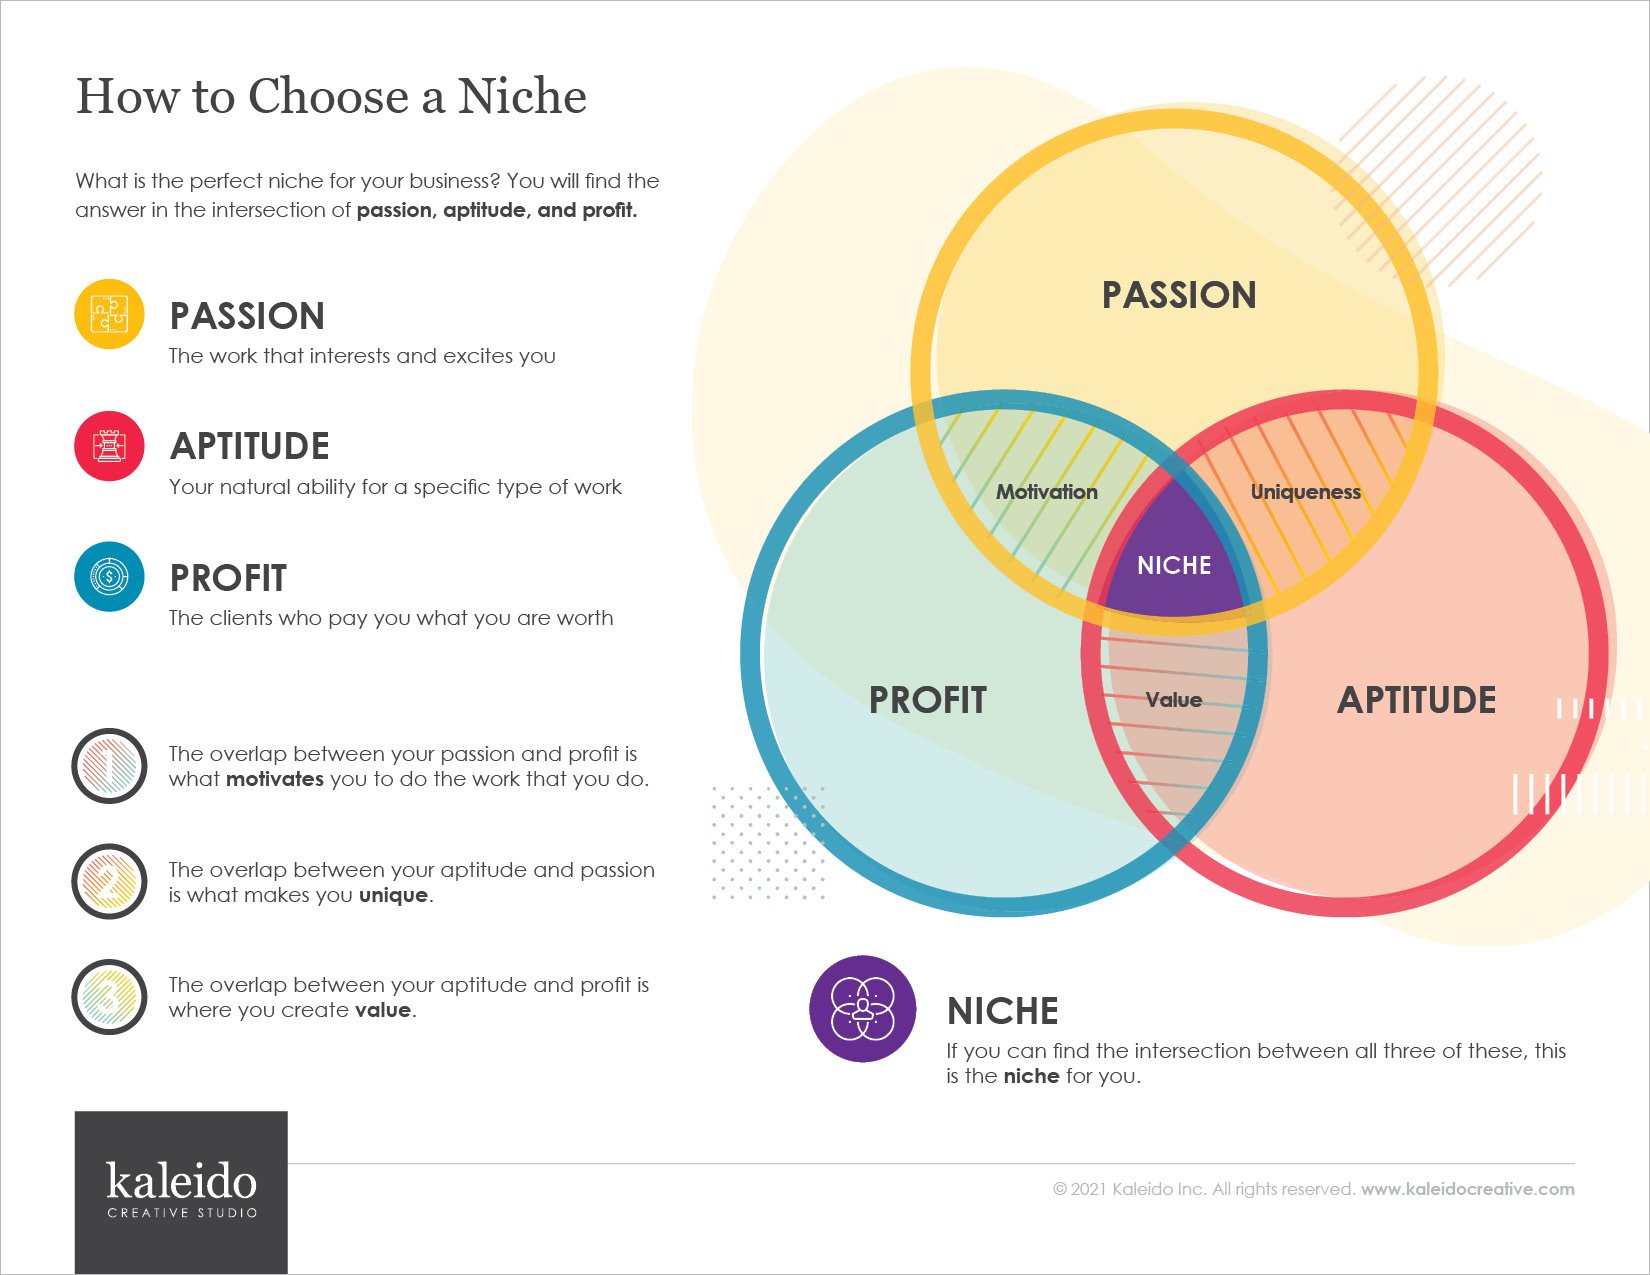 How to Choose a Niche